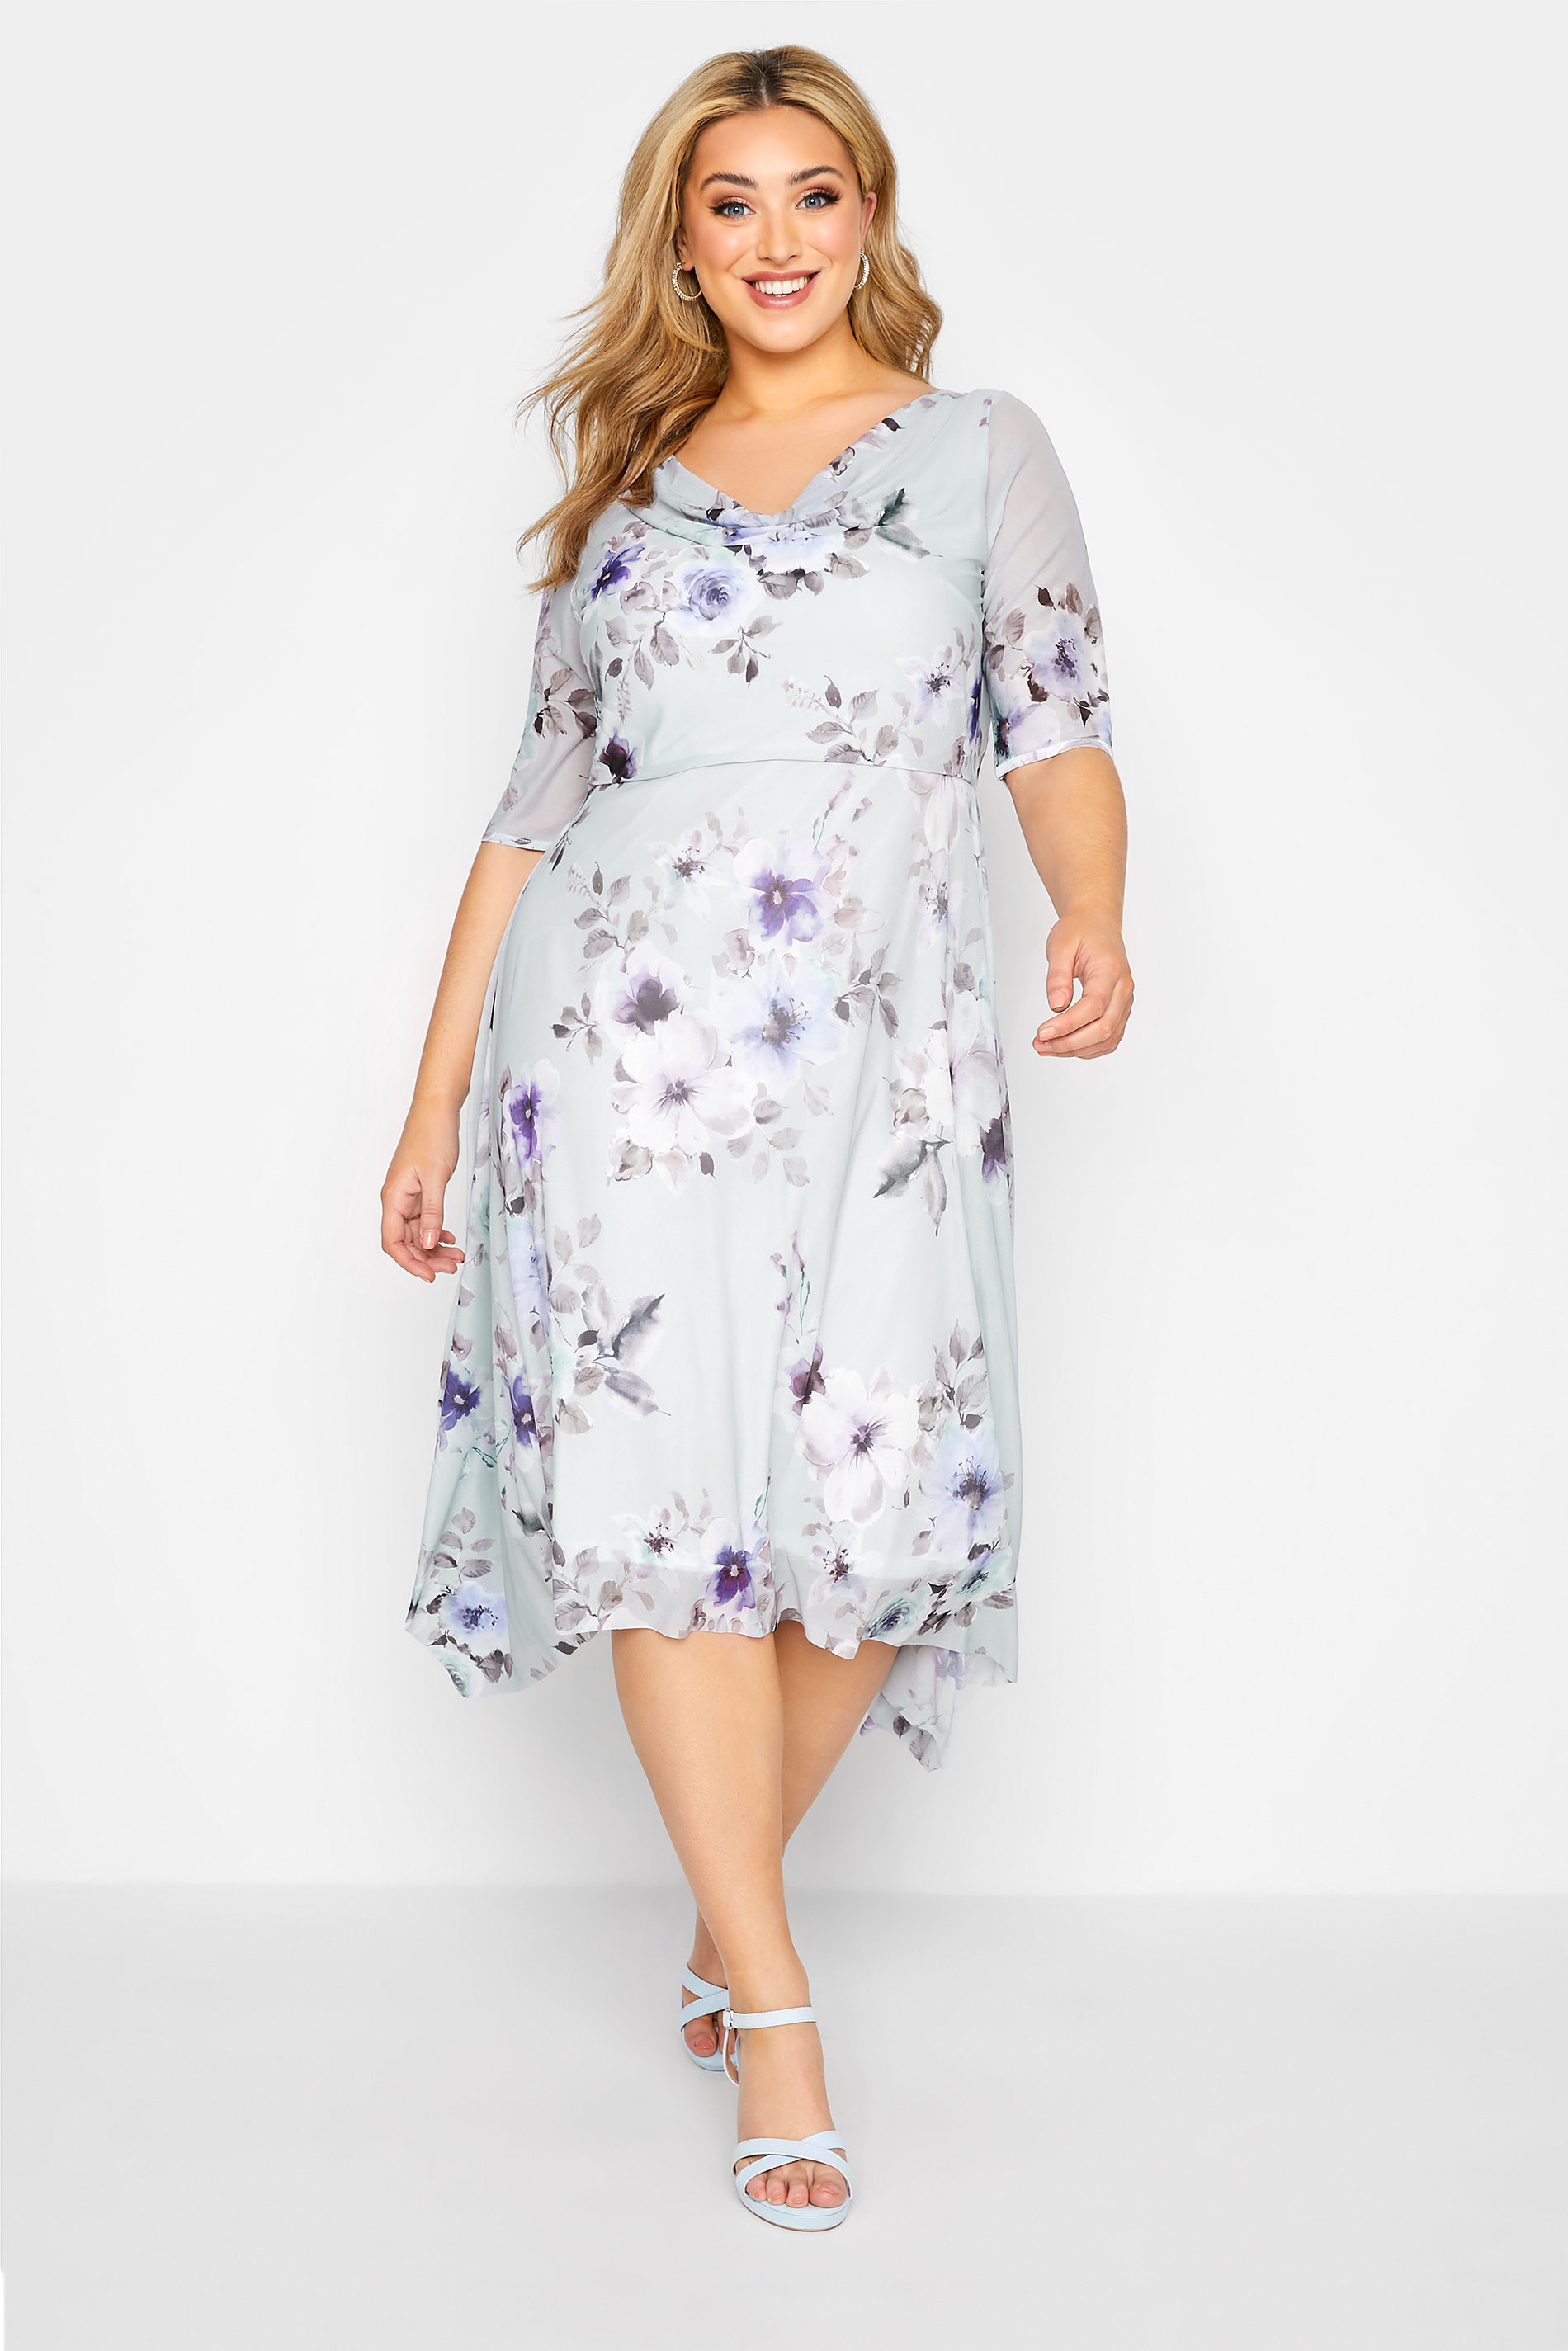 Robes Grande Taille Grande taille  Robes Occasions Spéciales | YOURS LONDON - Robe Grise Floral en Jersey - VG06986